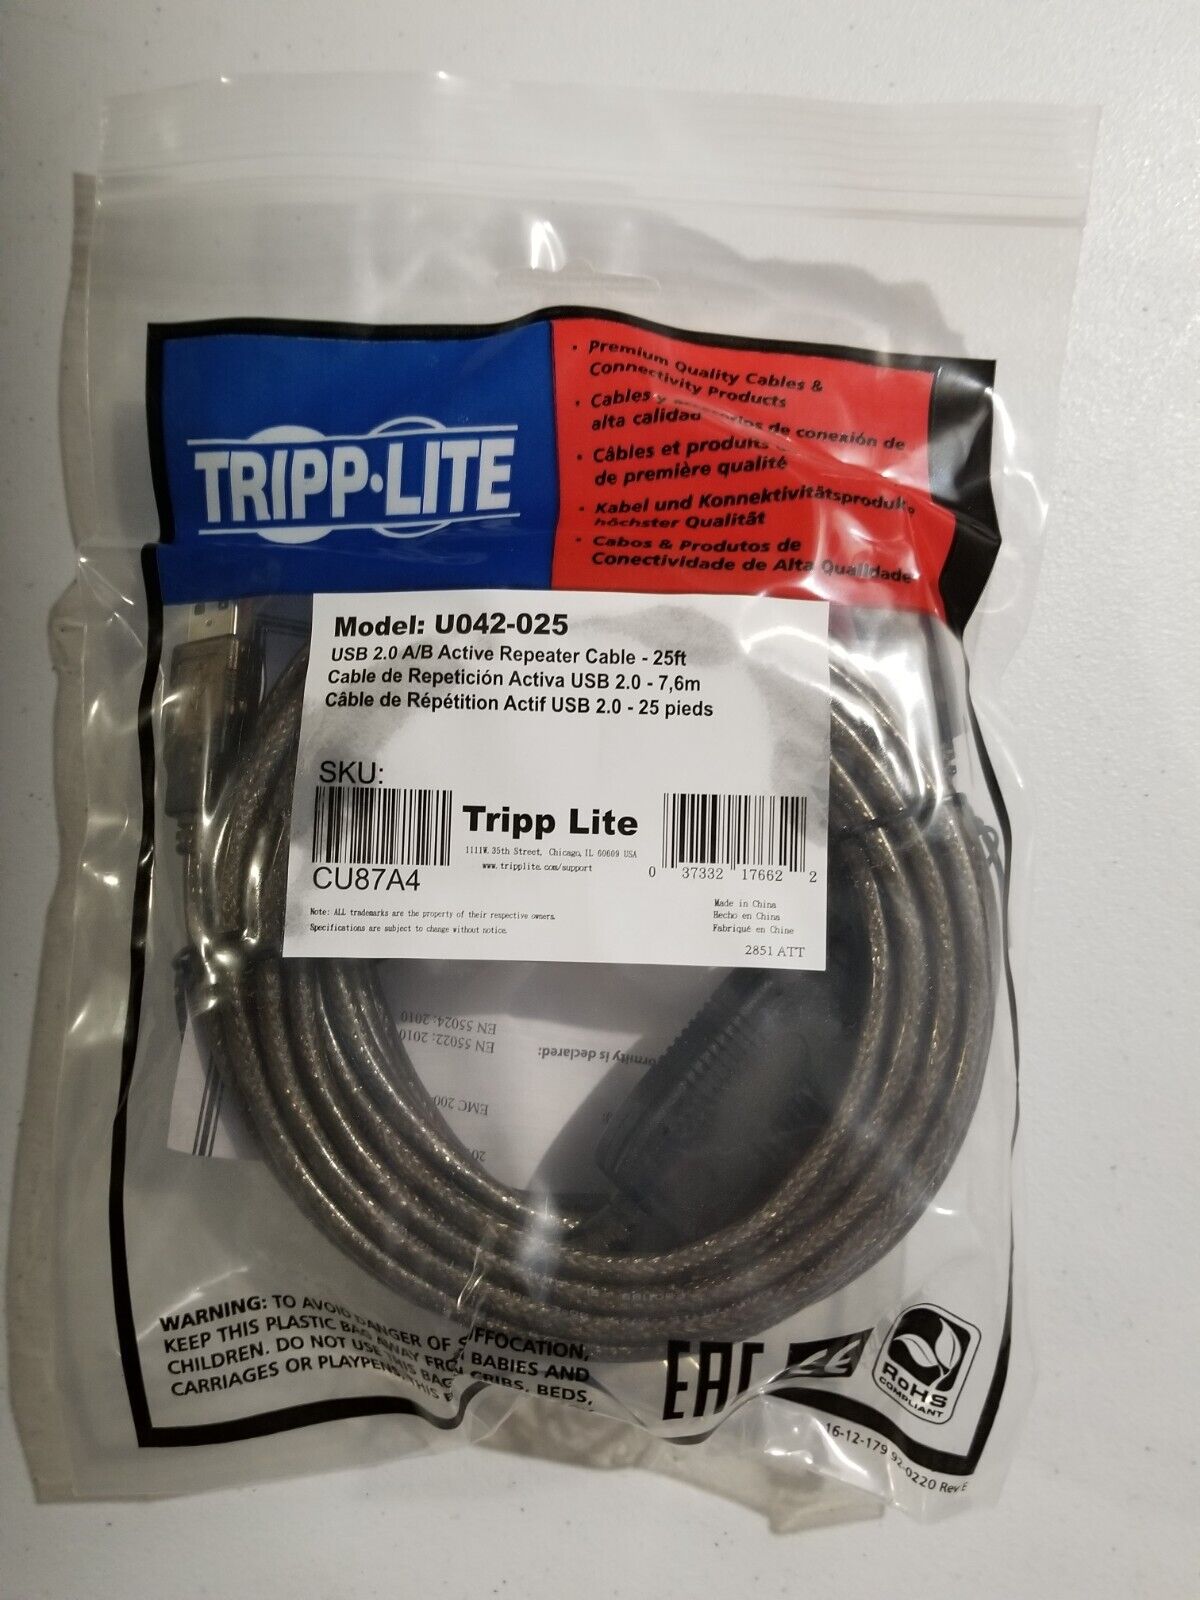 Tripp Lite USB 2.0 Active Repeater Cable Type A to B Male to Male  25' 25 Feet